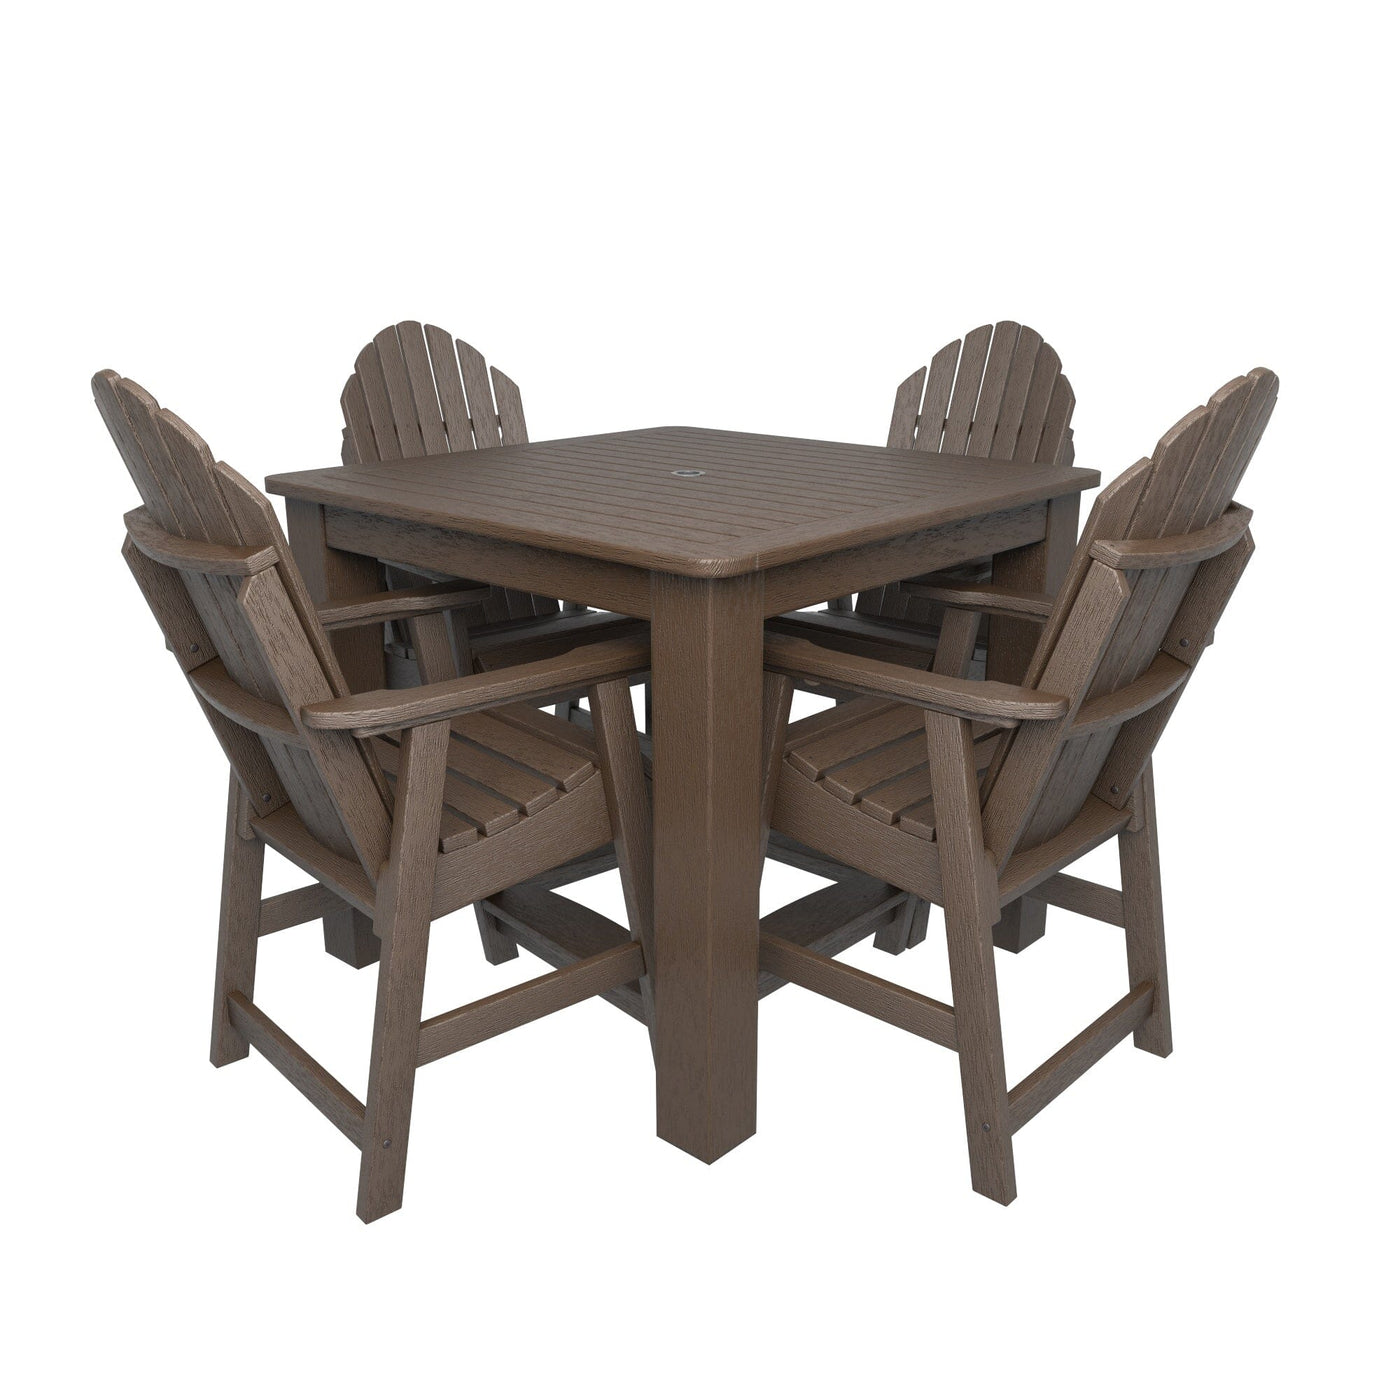 Hamilton 5pc Square Dining Set 42in x 42in - Counter Height Dining Highwood USA Weathered Acorn 